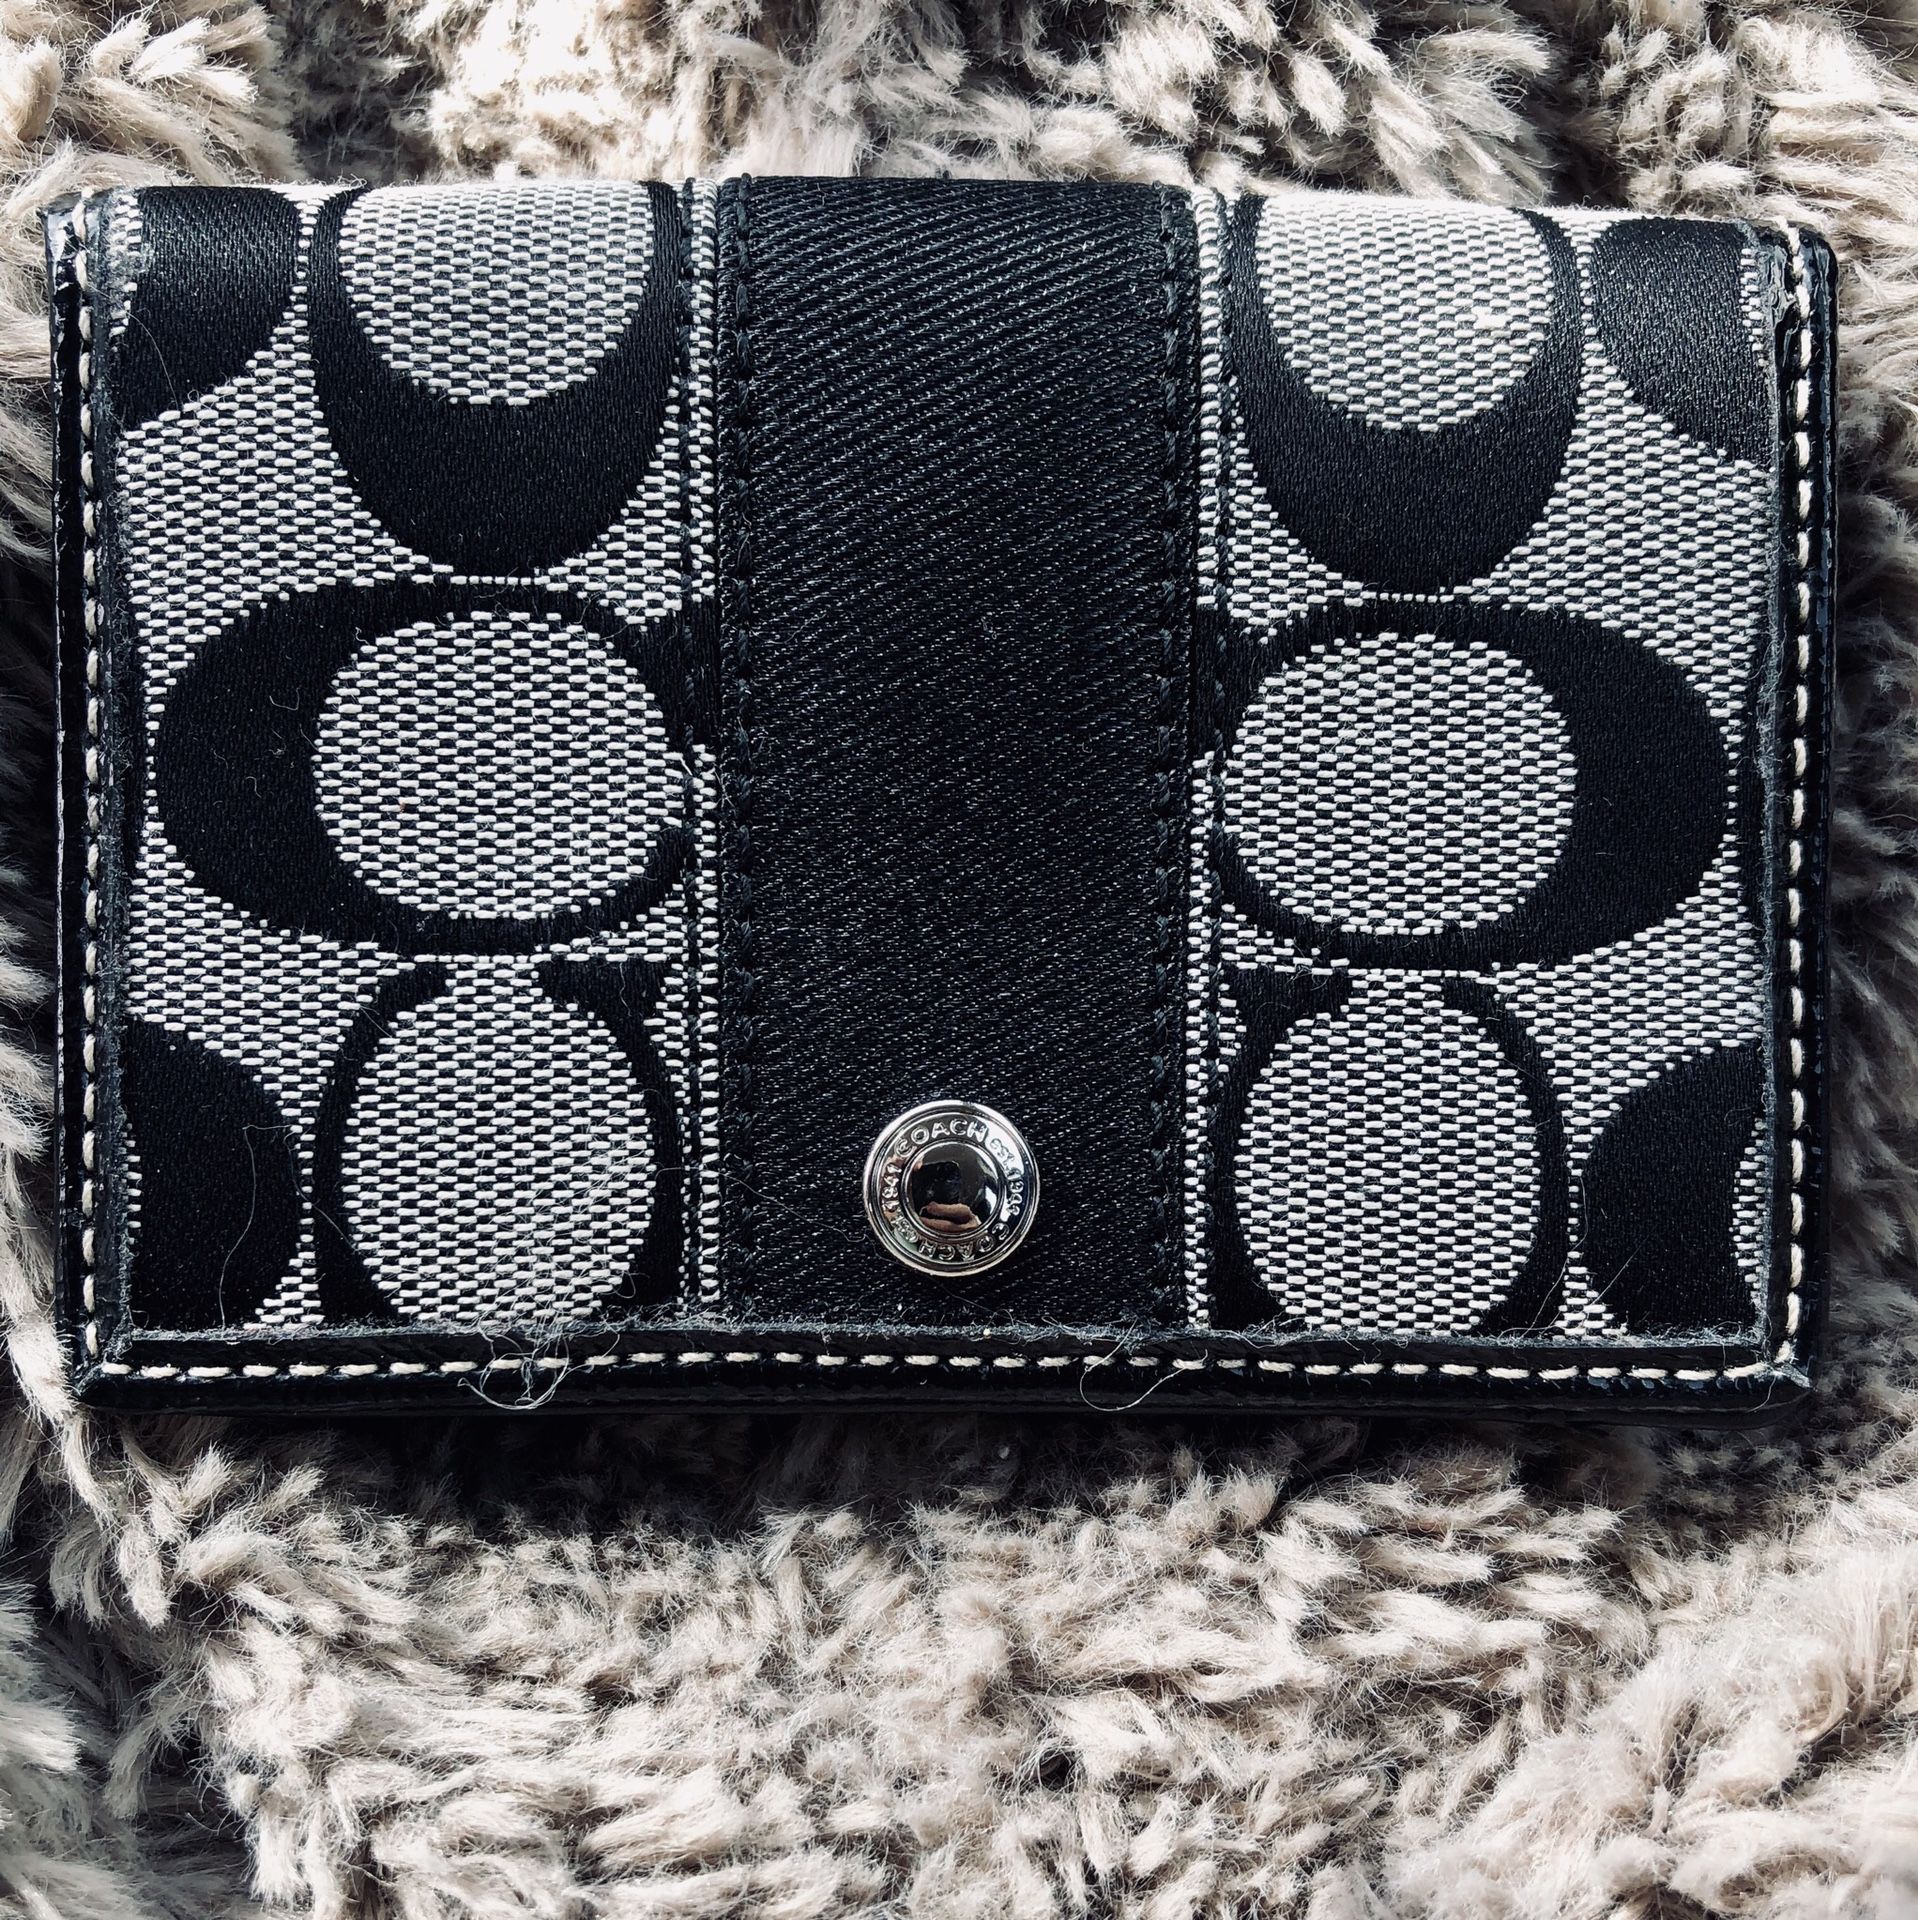 Possibly a Coach Wallet